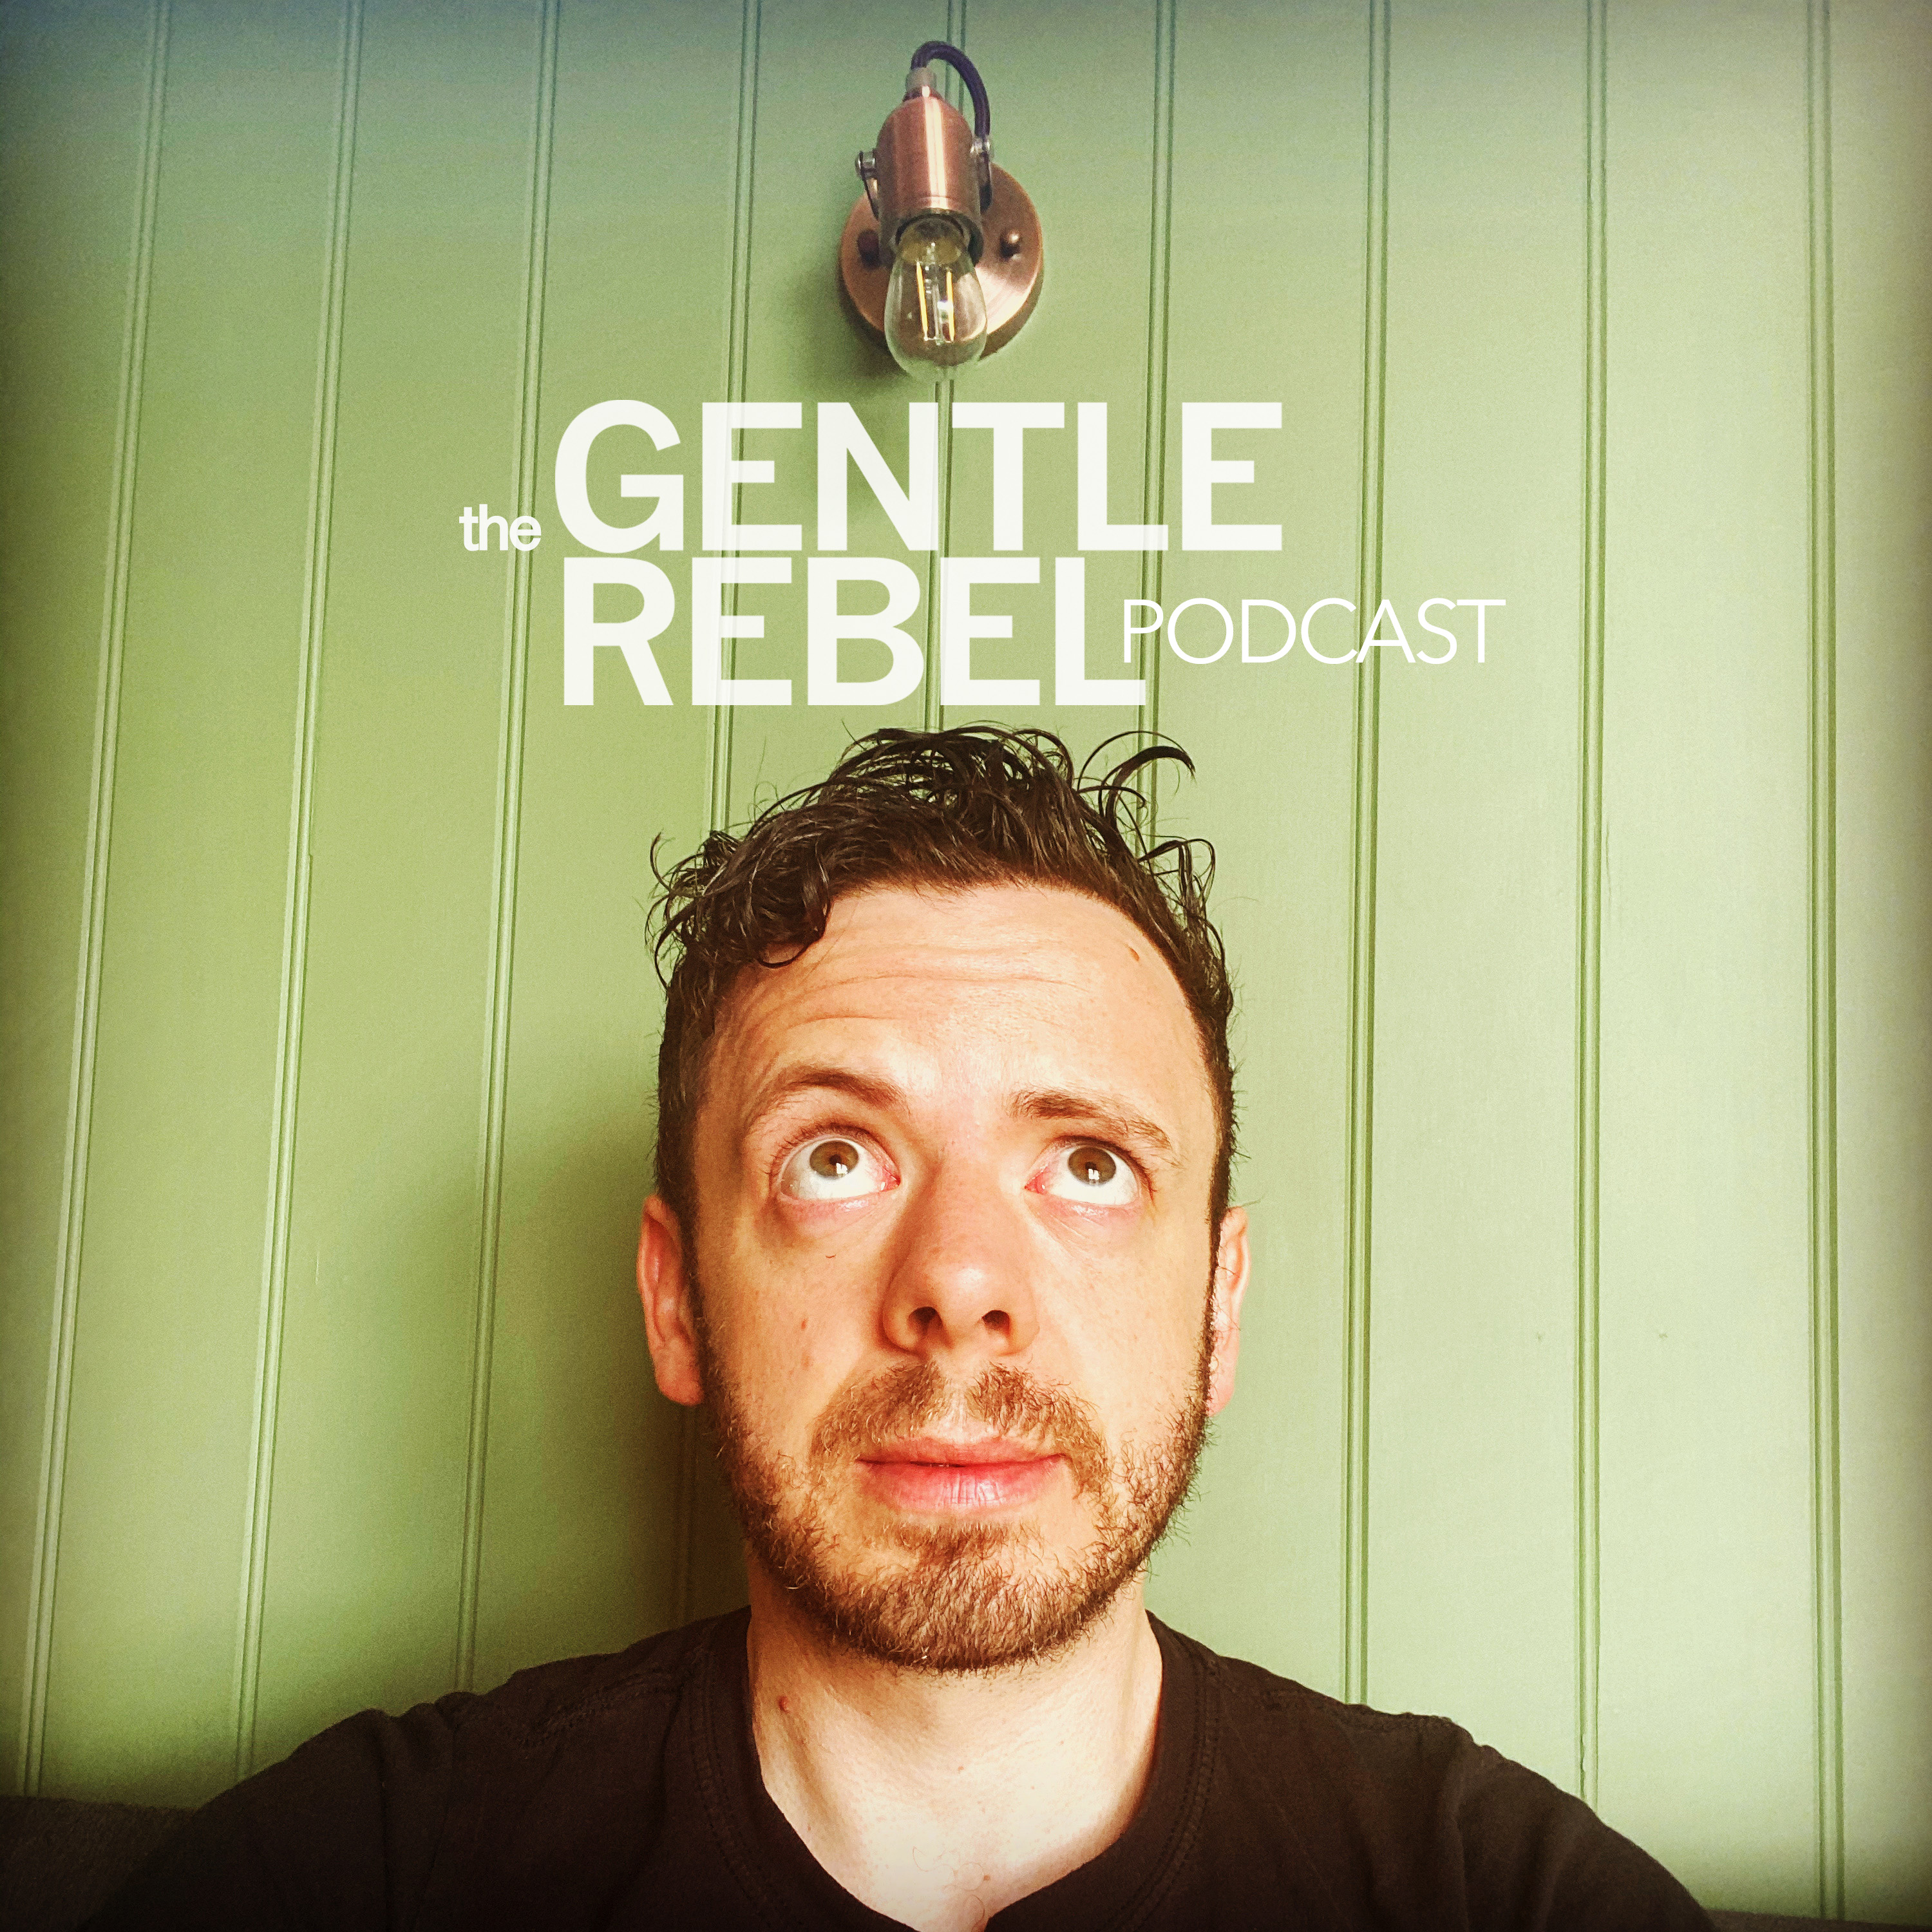 The Gentle Rebel Podcast